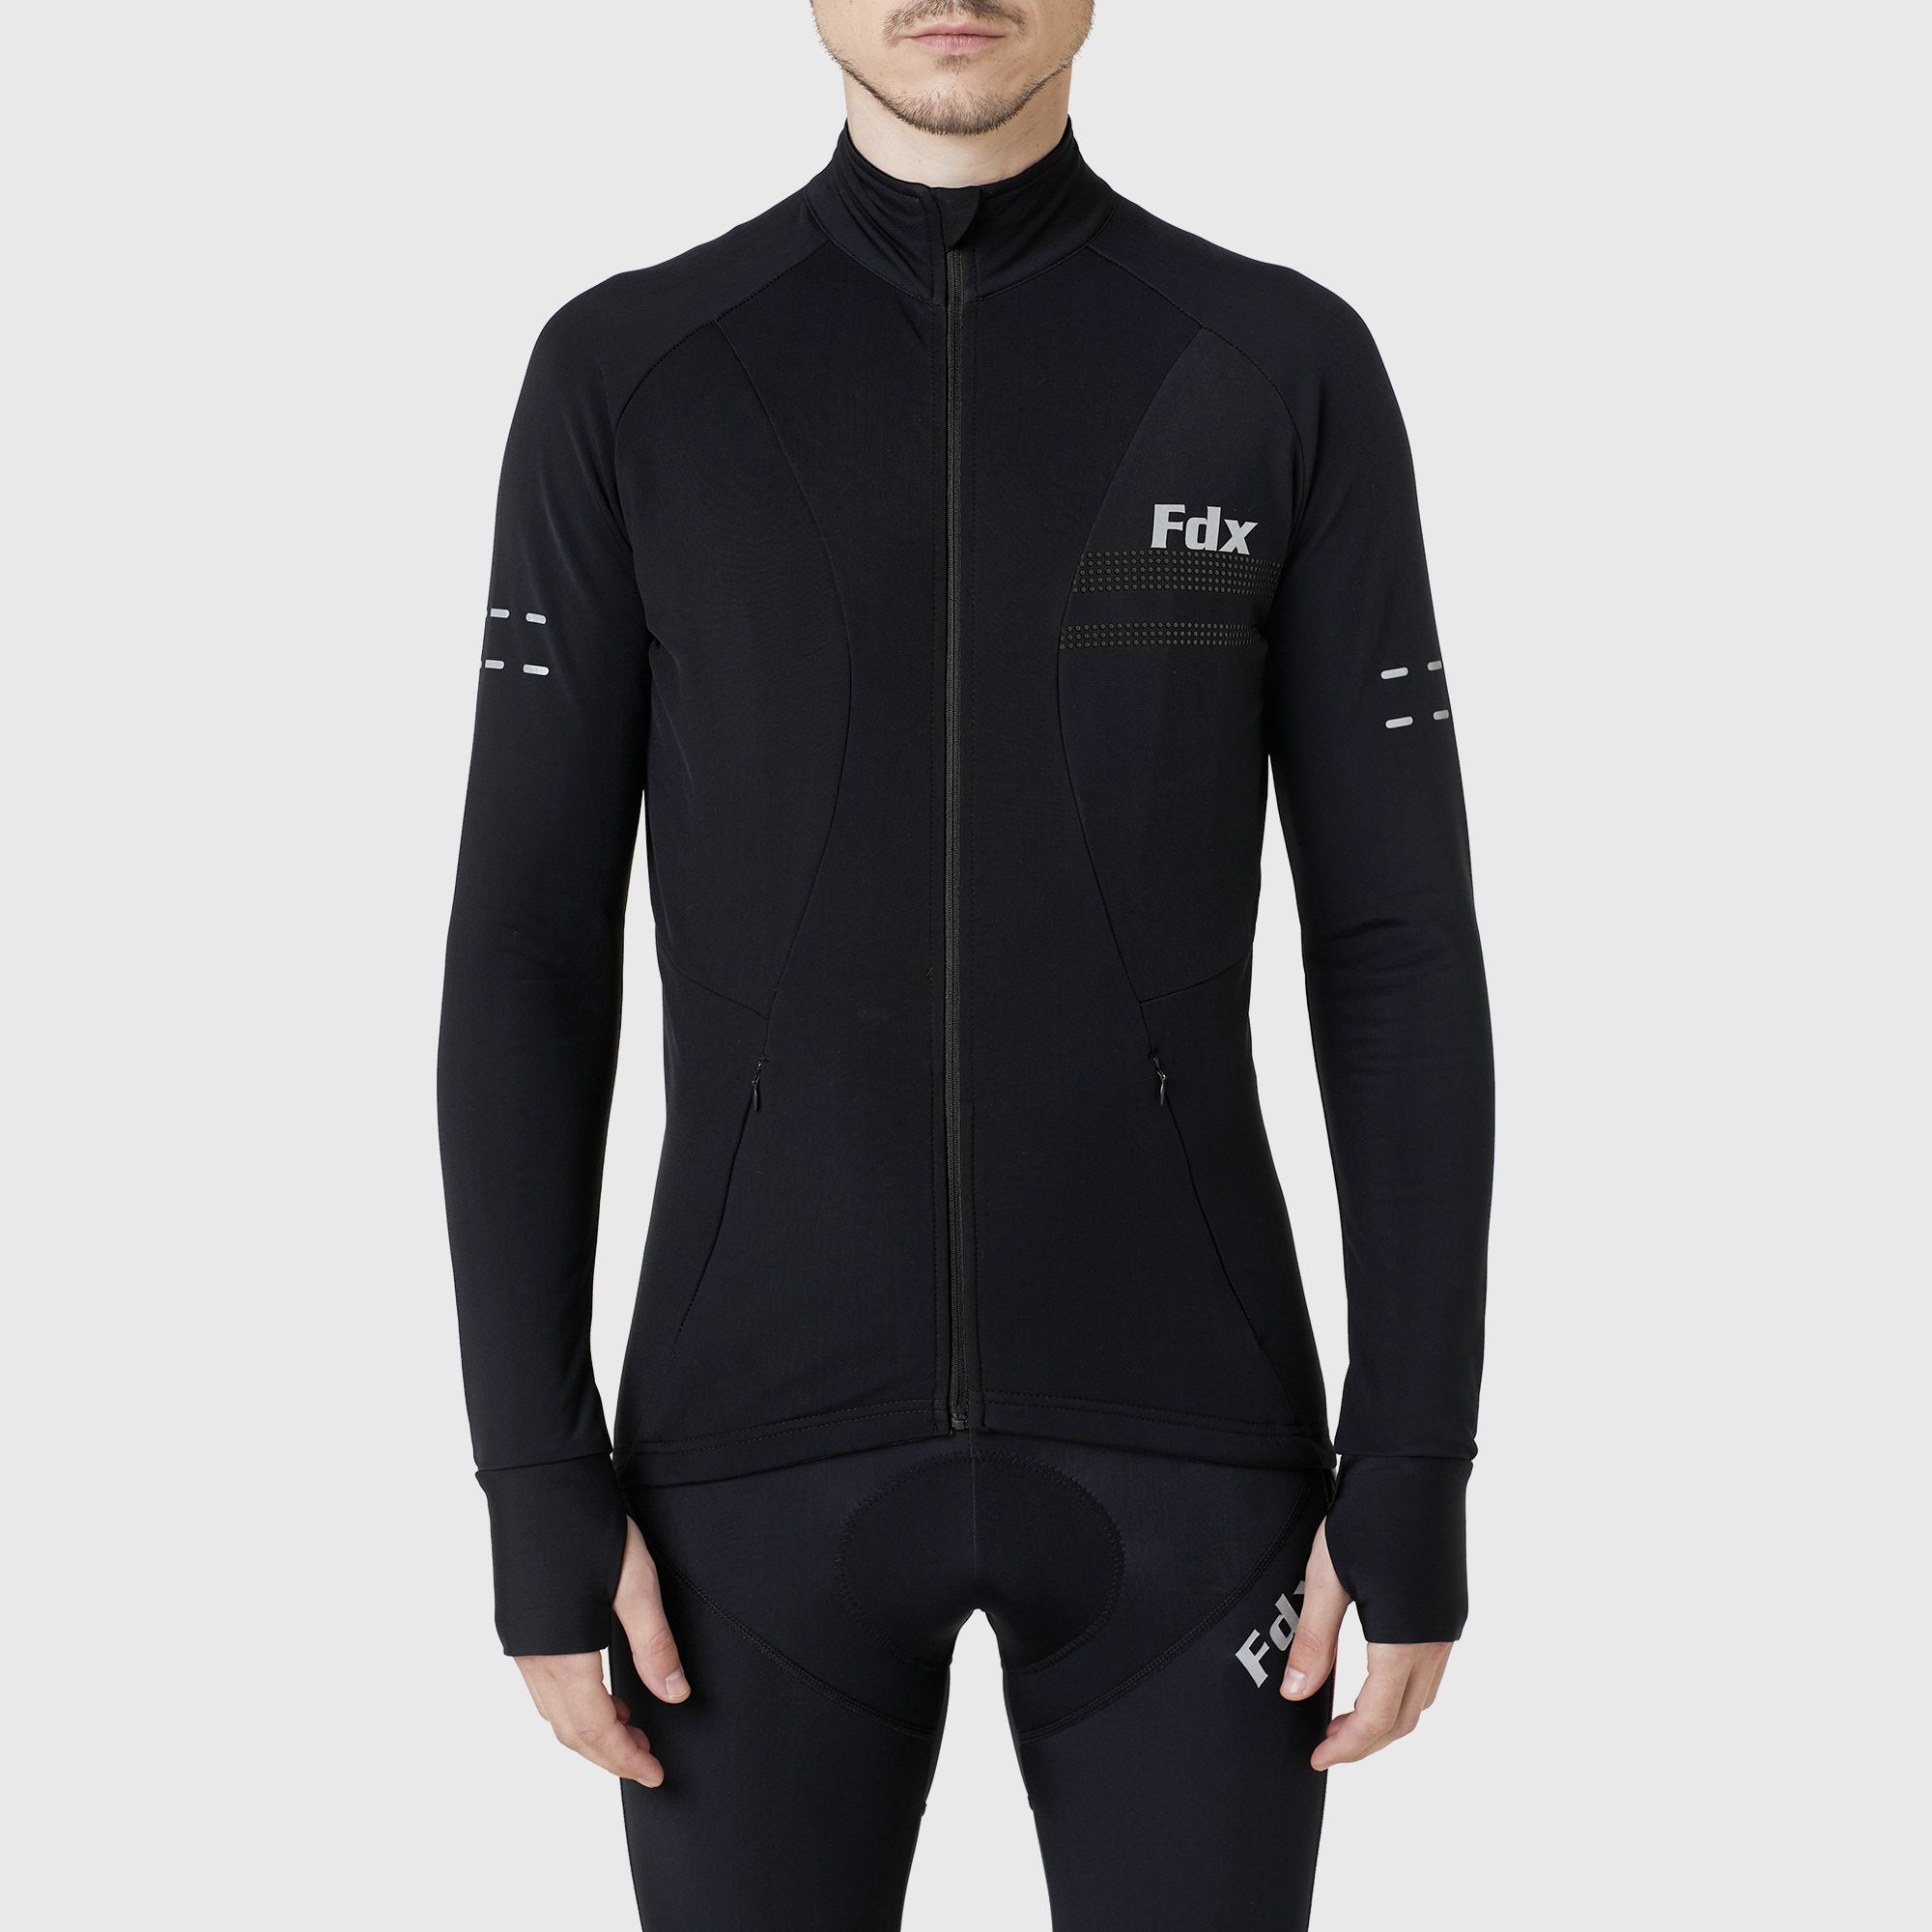 Fdx Arch Men's Black Thermal Long Sleeve Cycling Jersey